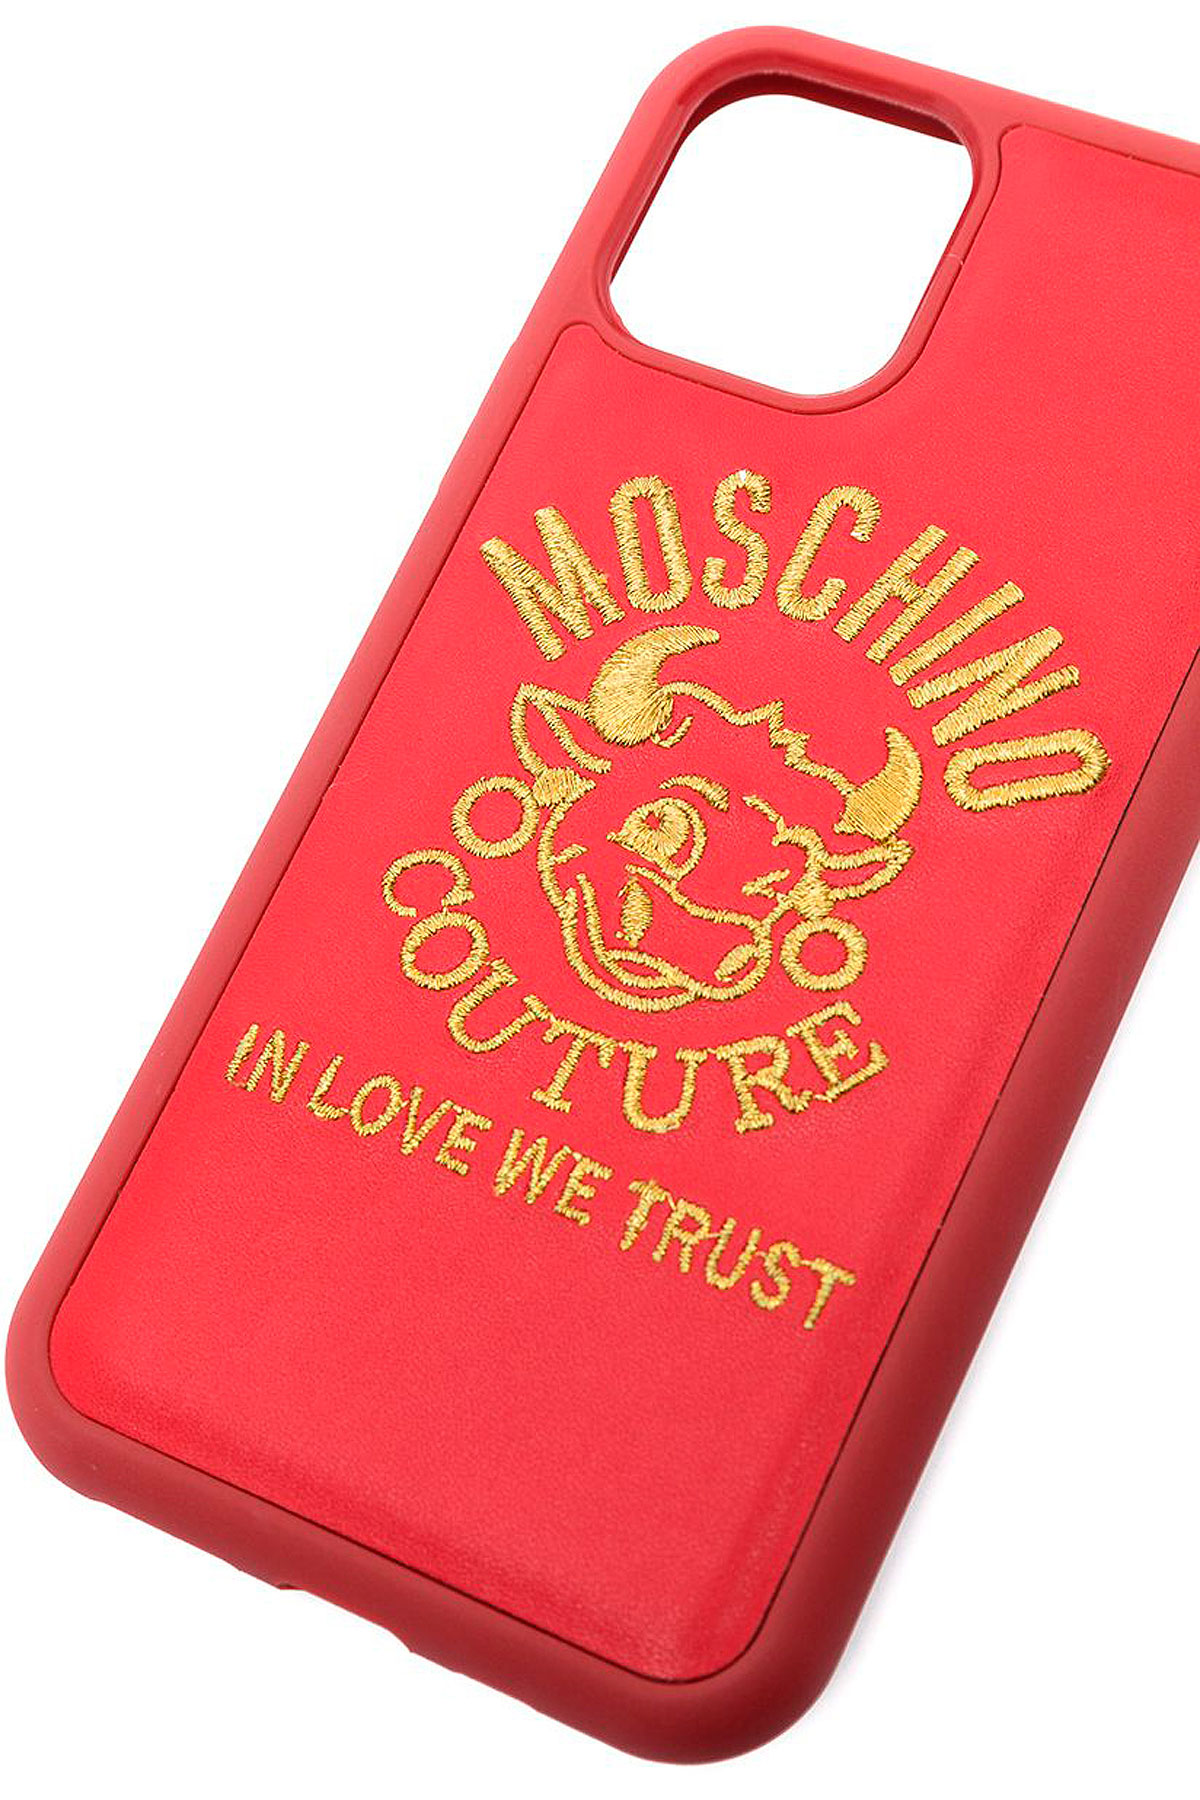 Iphone Cases Moschino Style Code 978 52 1112